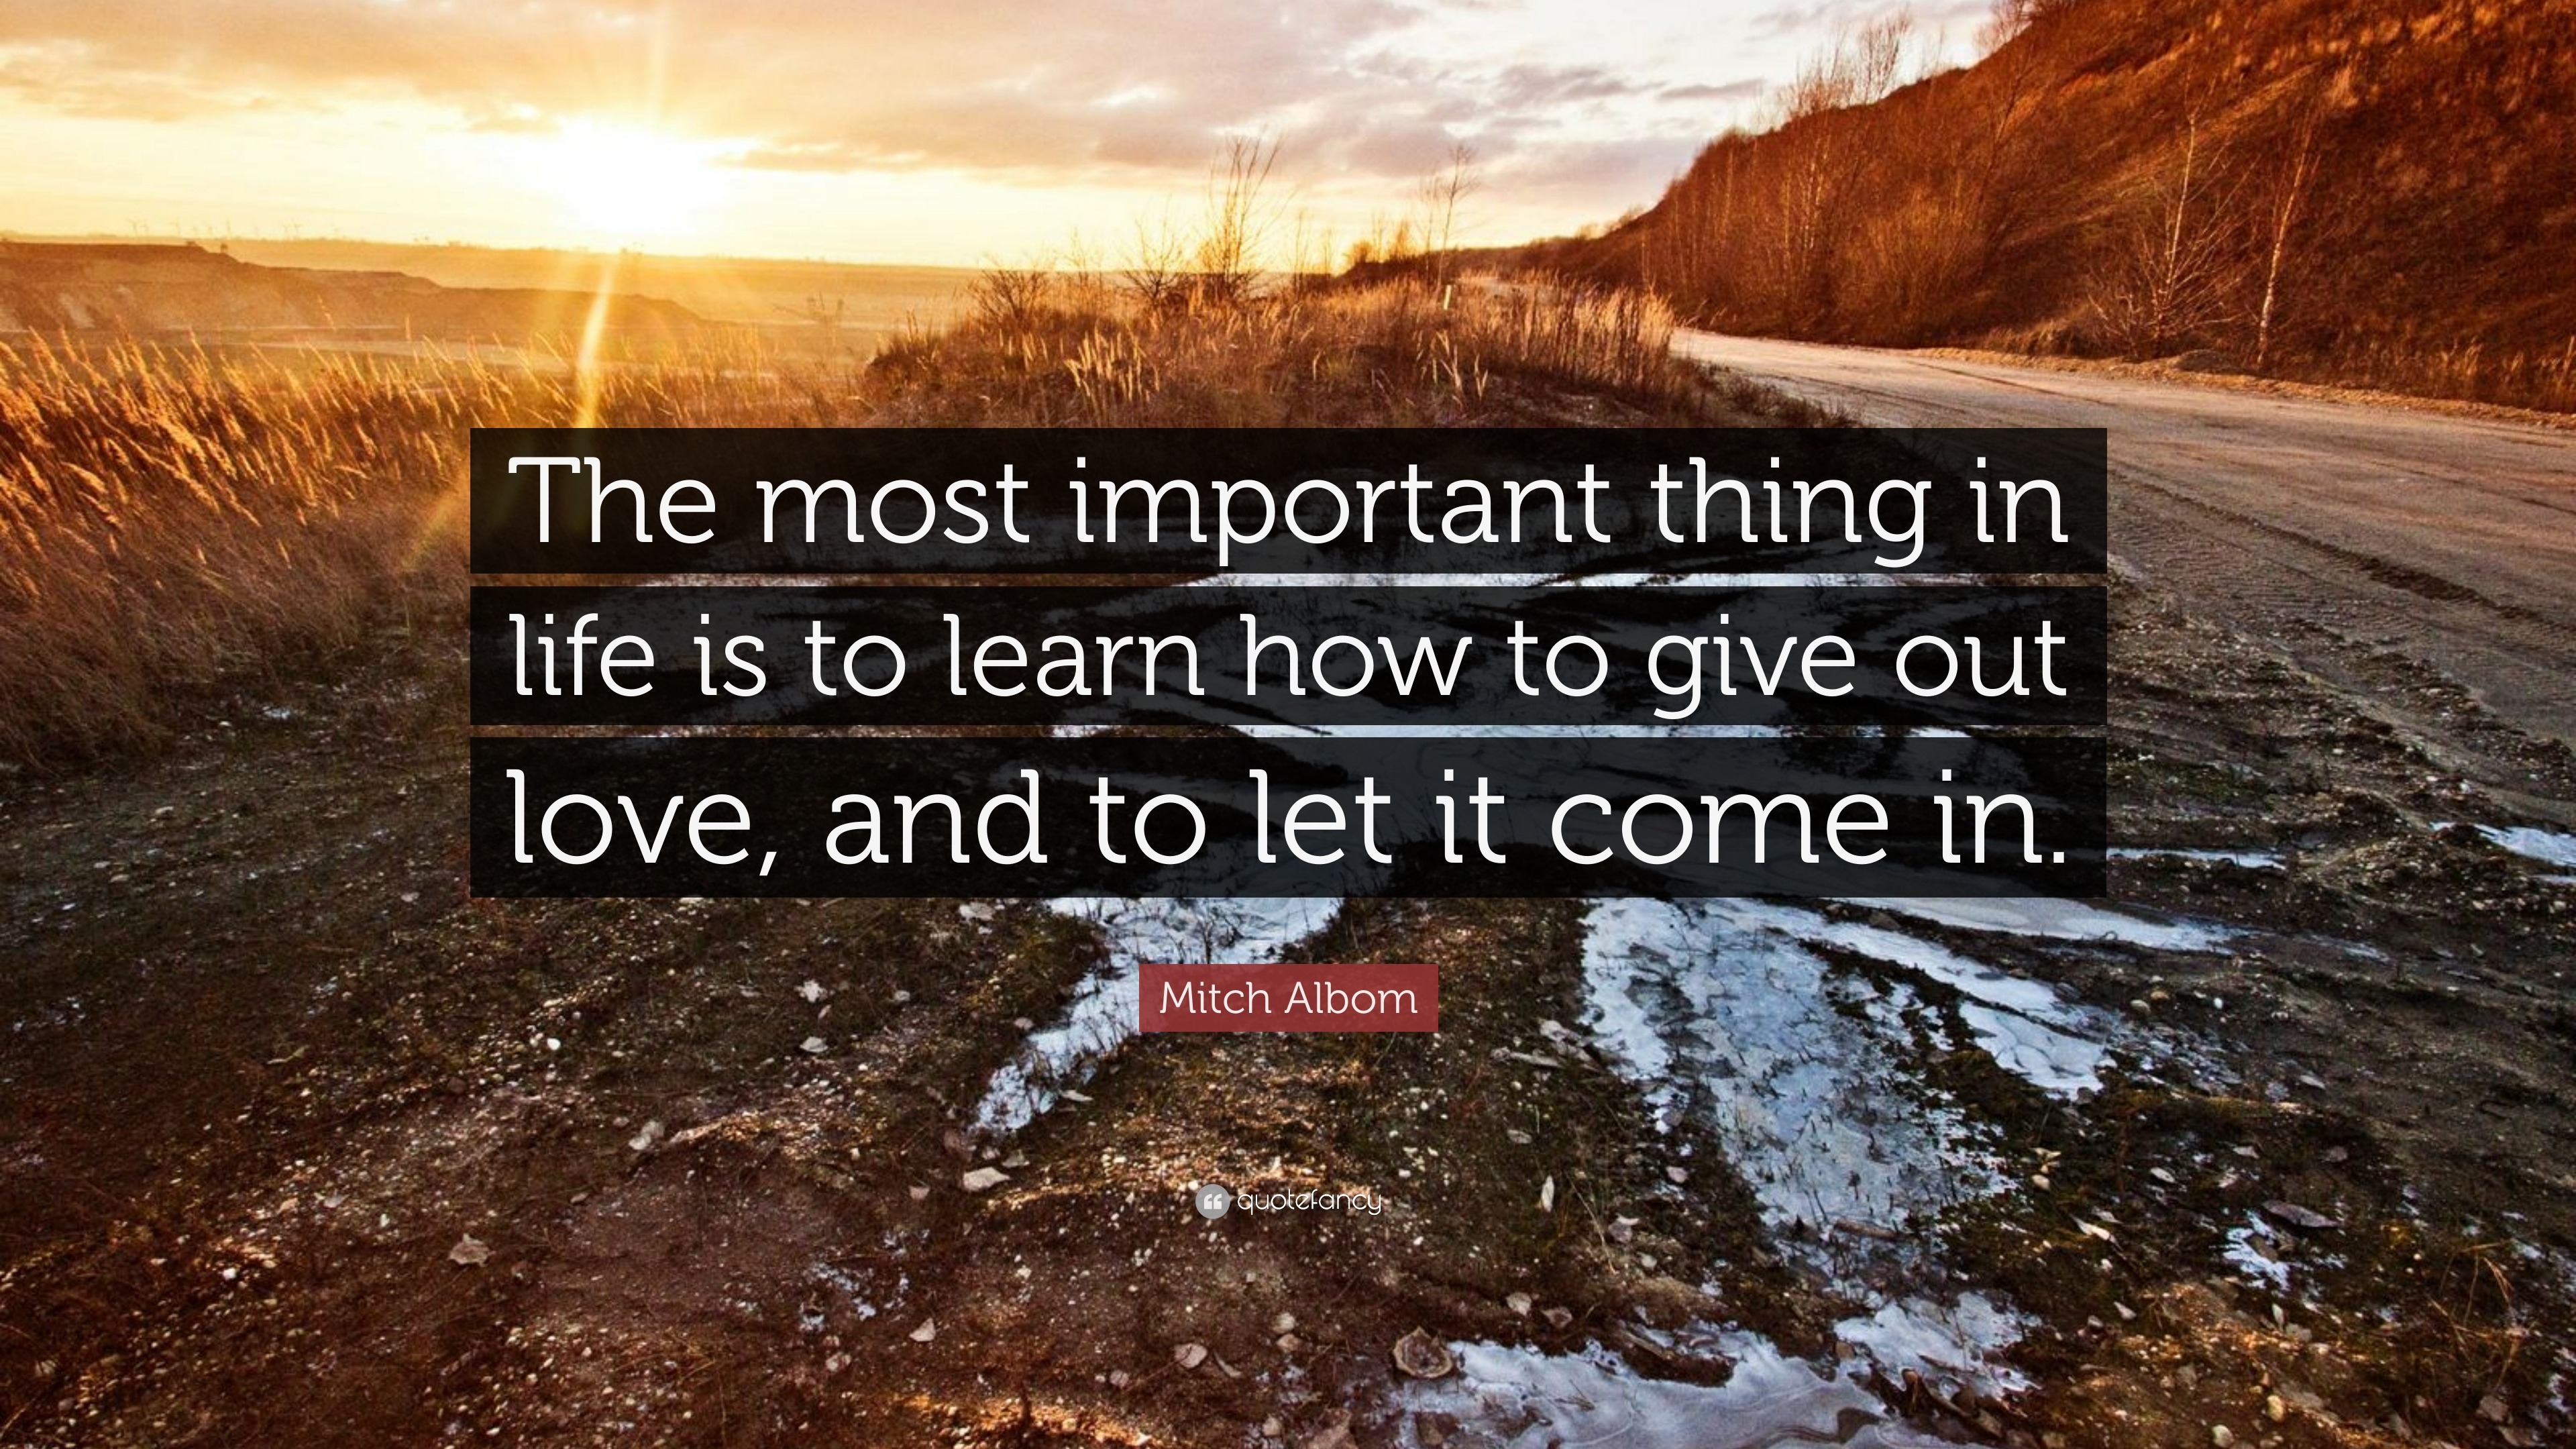 Mitch Albom Quote: “The most important thing in life is to learn how to